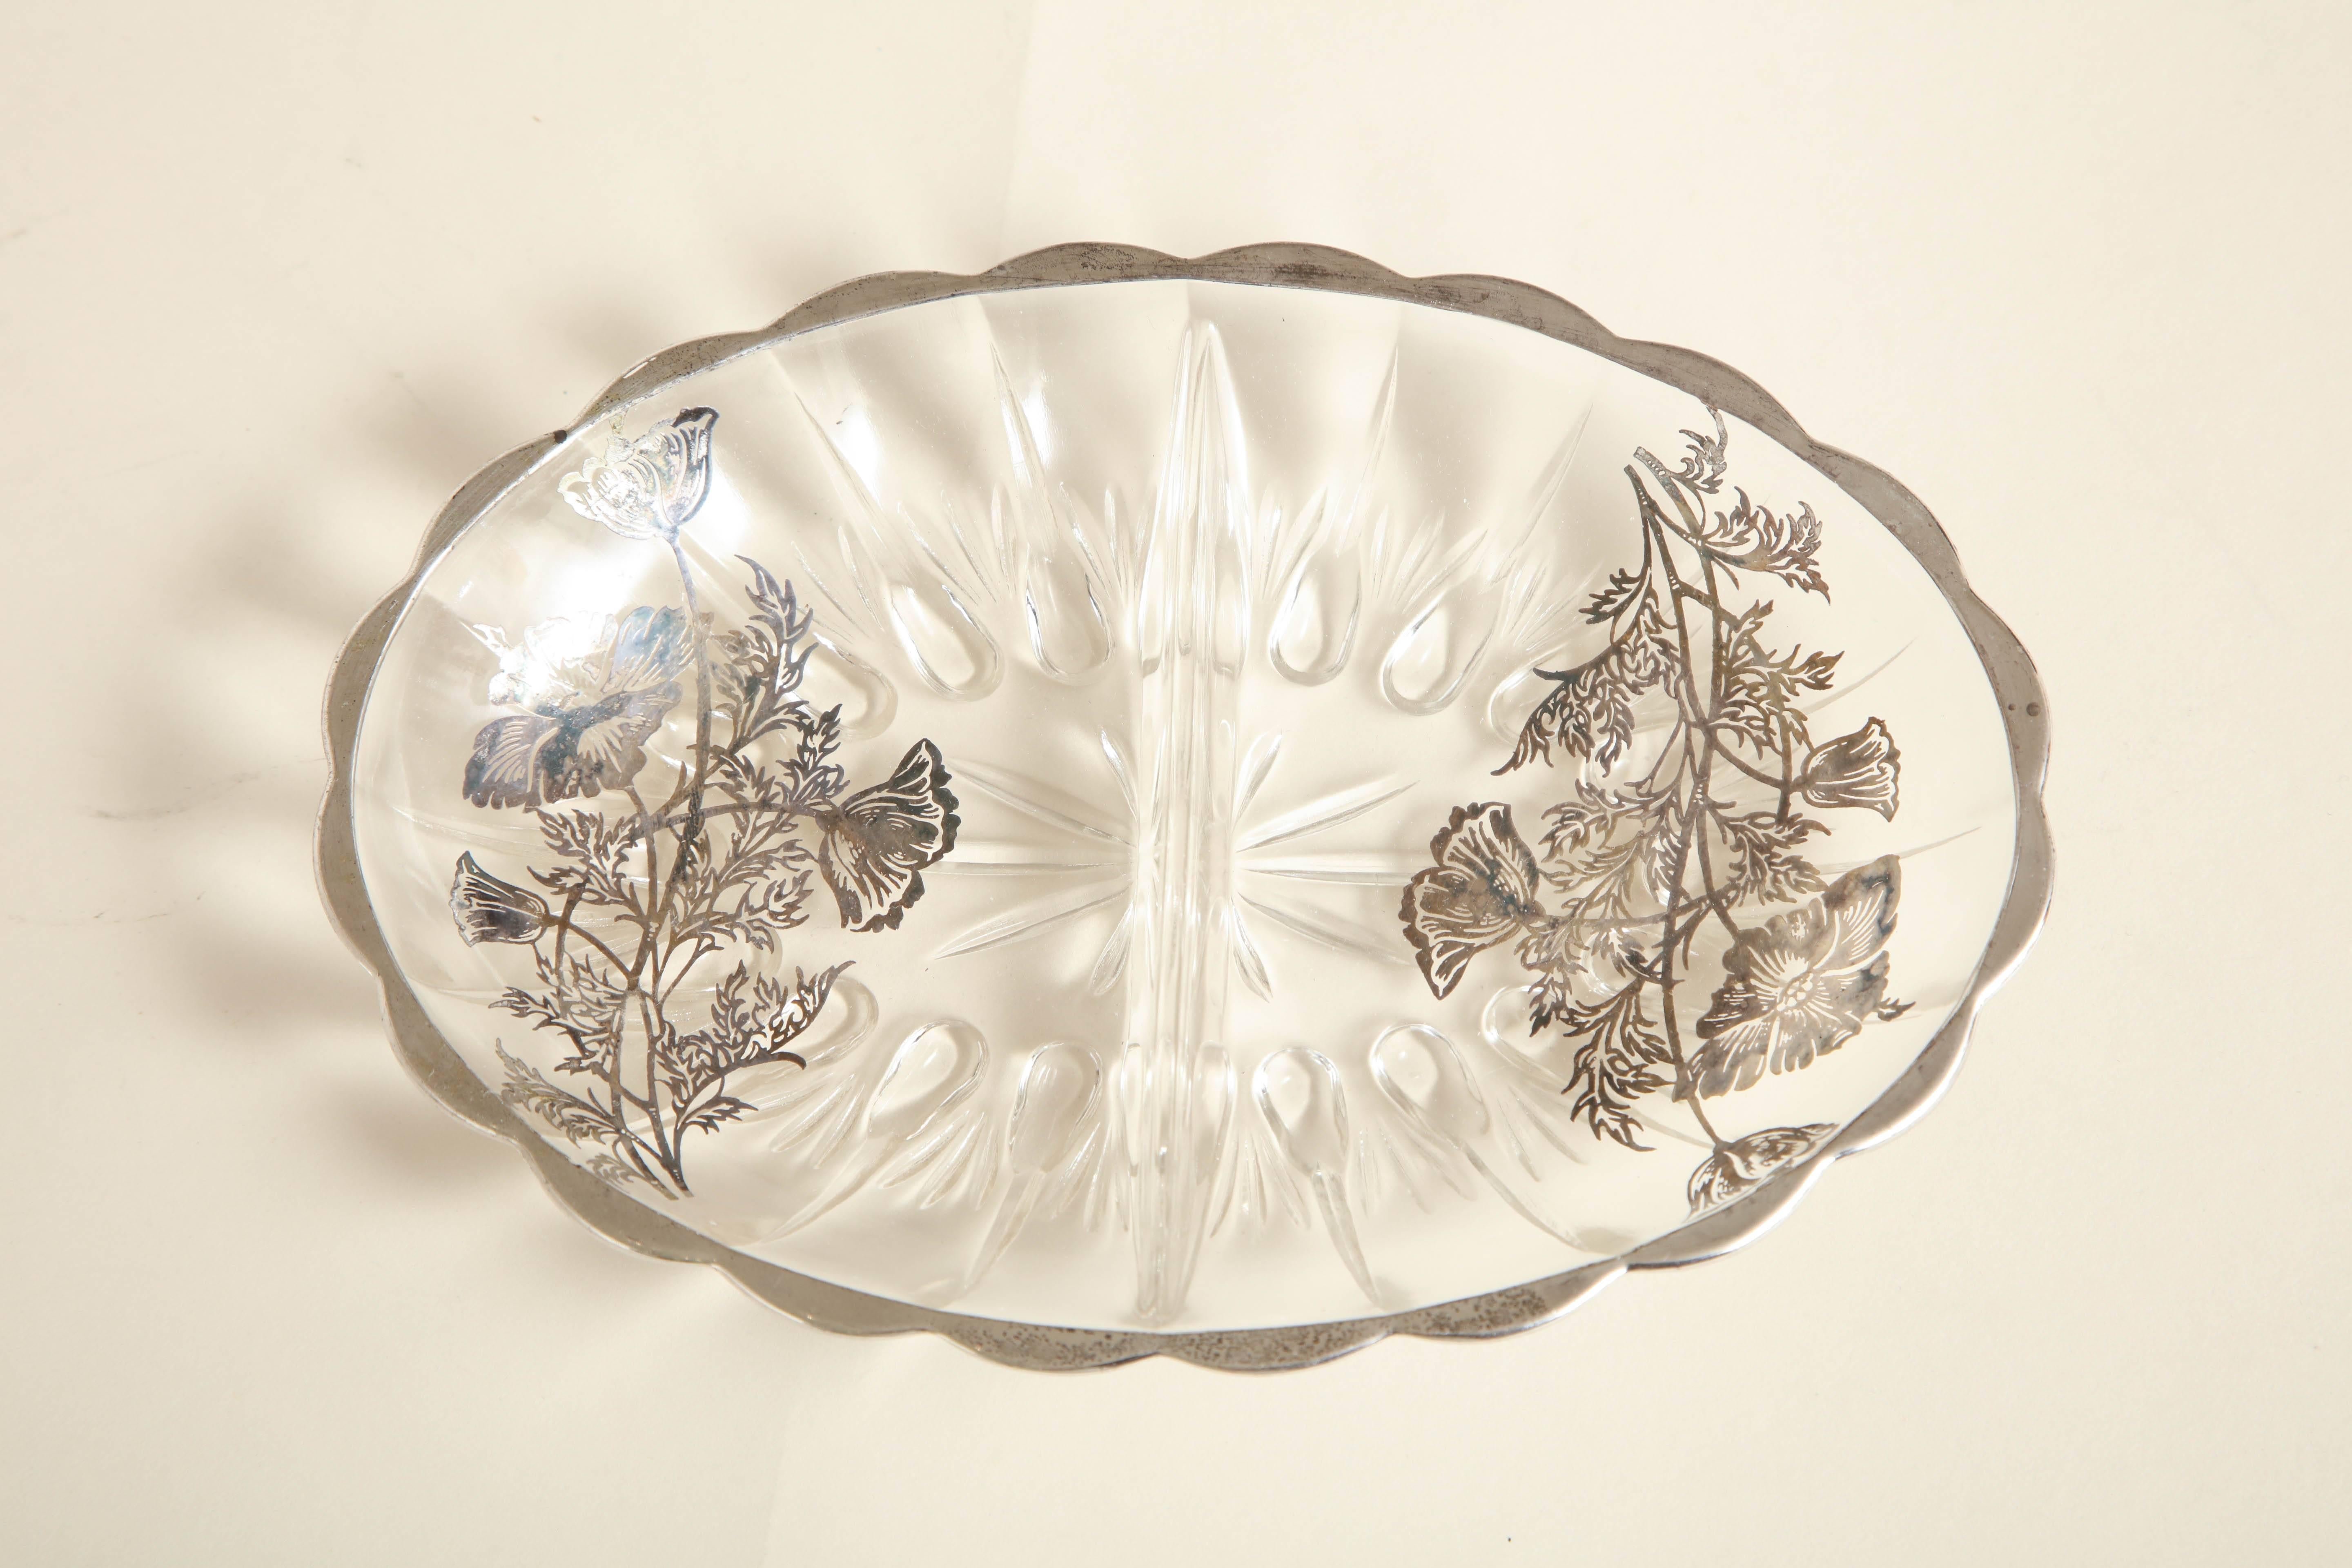 Clear molded art glass with silver resist floral overlay and silver scalloped rim.